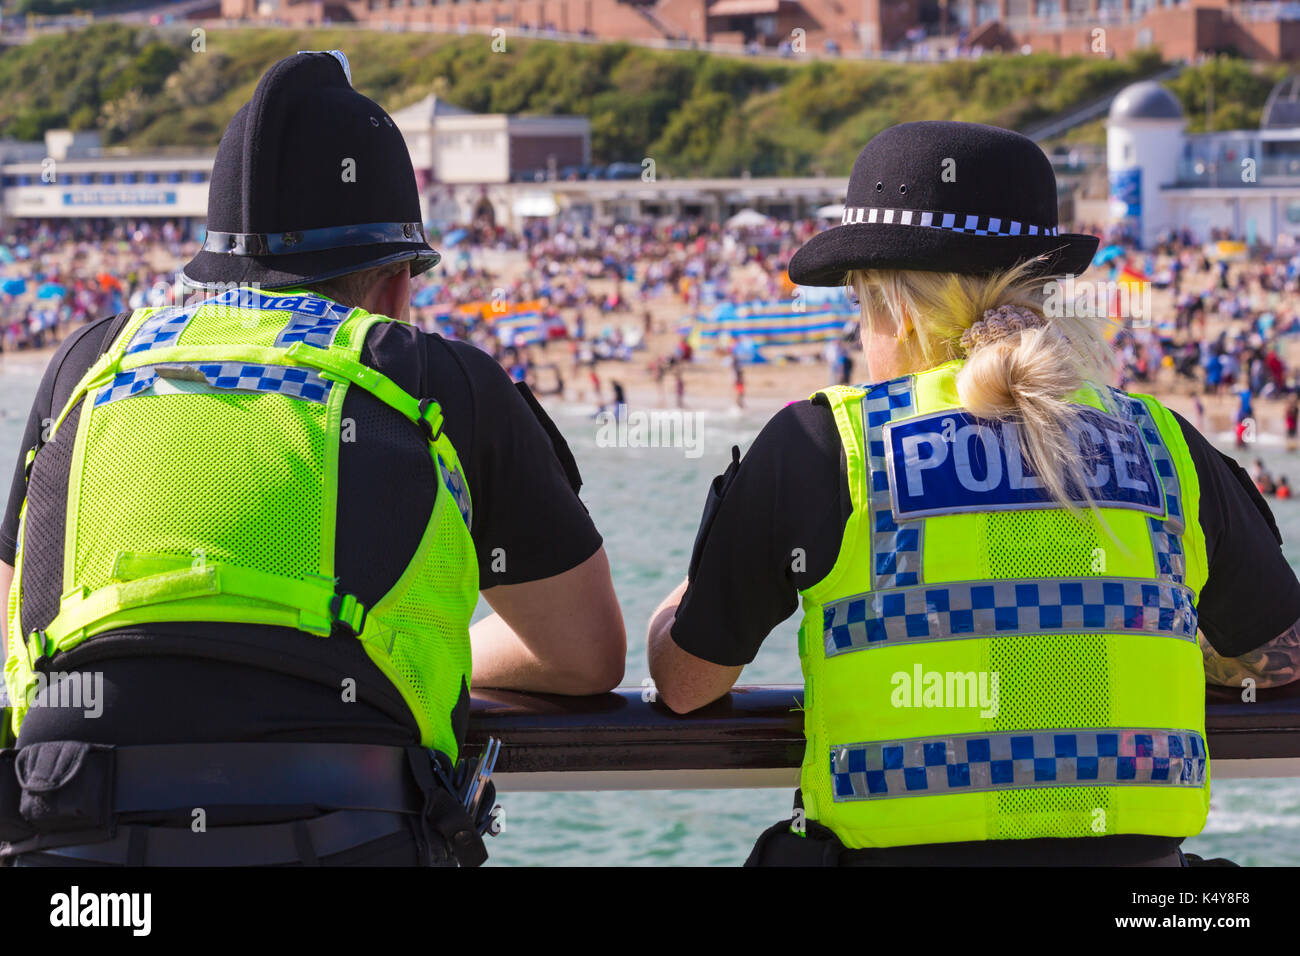 Police, policeman and policewoman, on duty on Bournemouth Pier during Bournemouth Air Festival at Bournemouth, Dorset UK in September Stock Photo